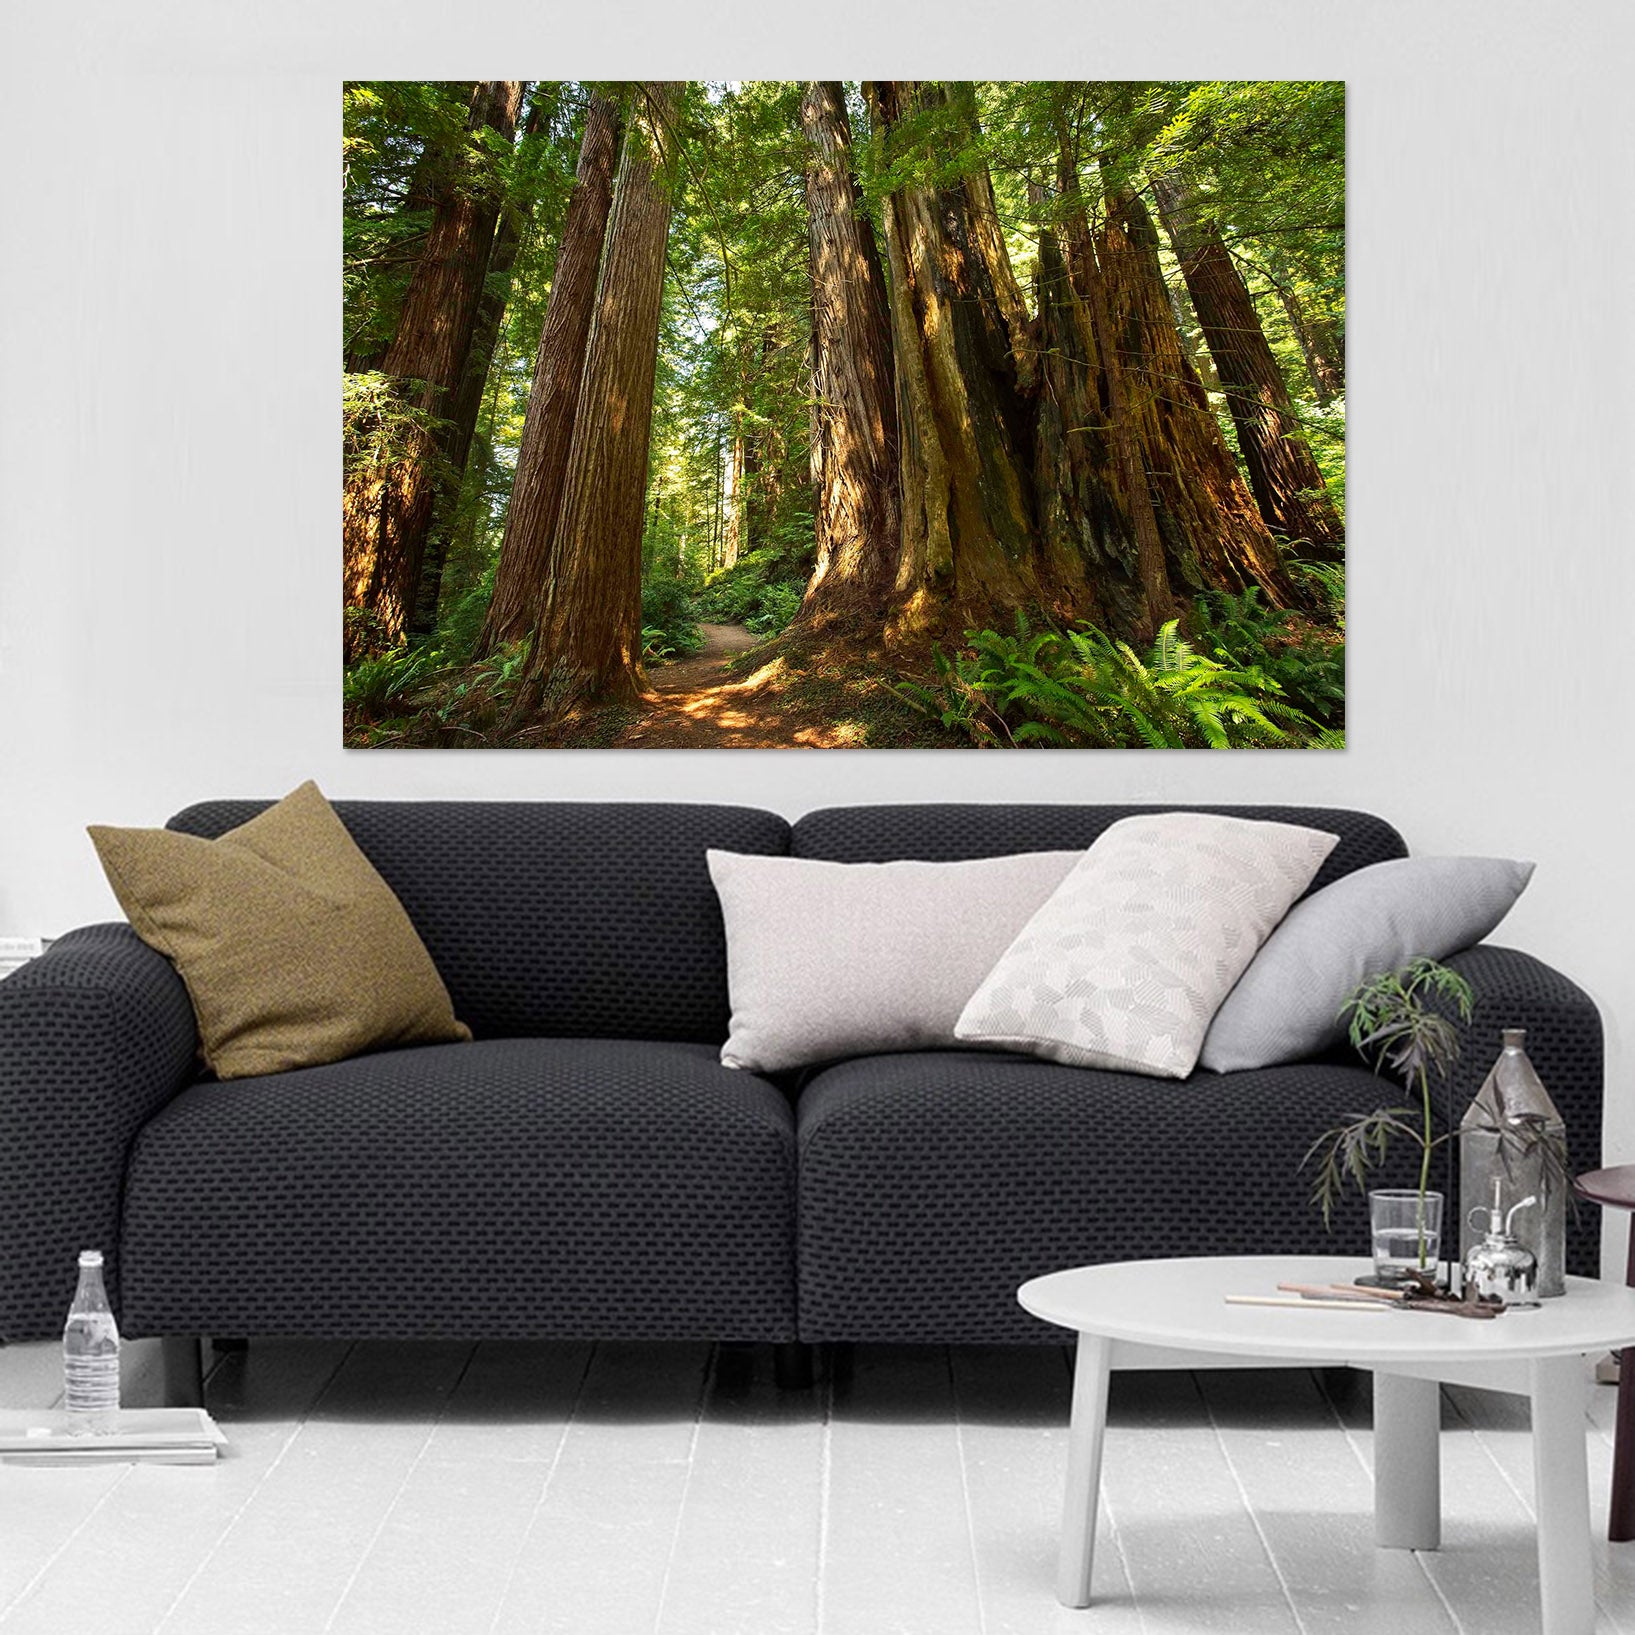 3D Old Forest 024 Kathy Barefield Wall Sticker